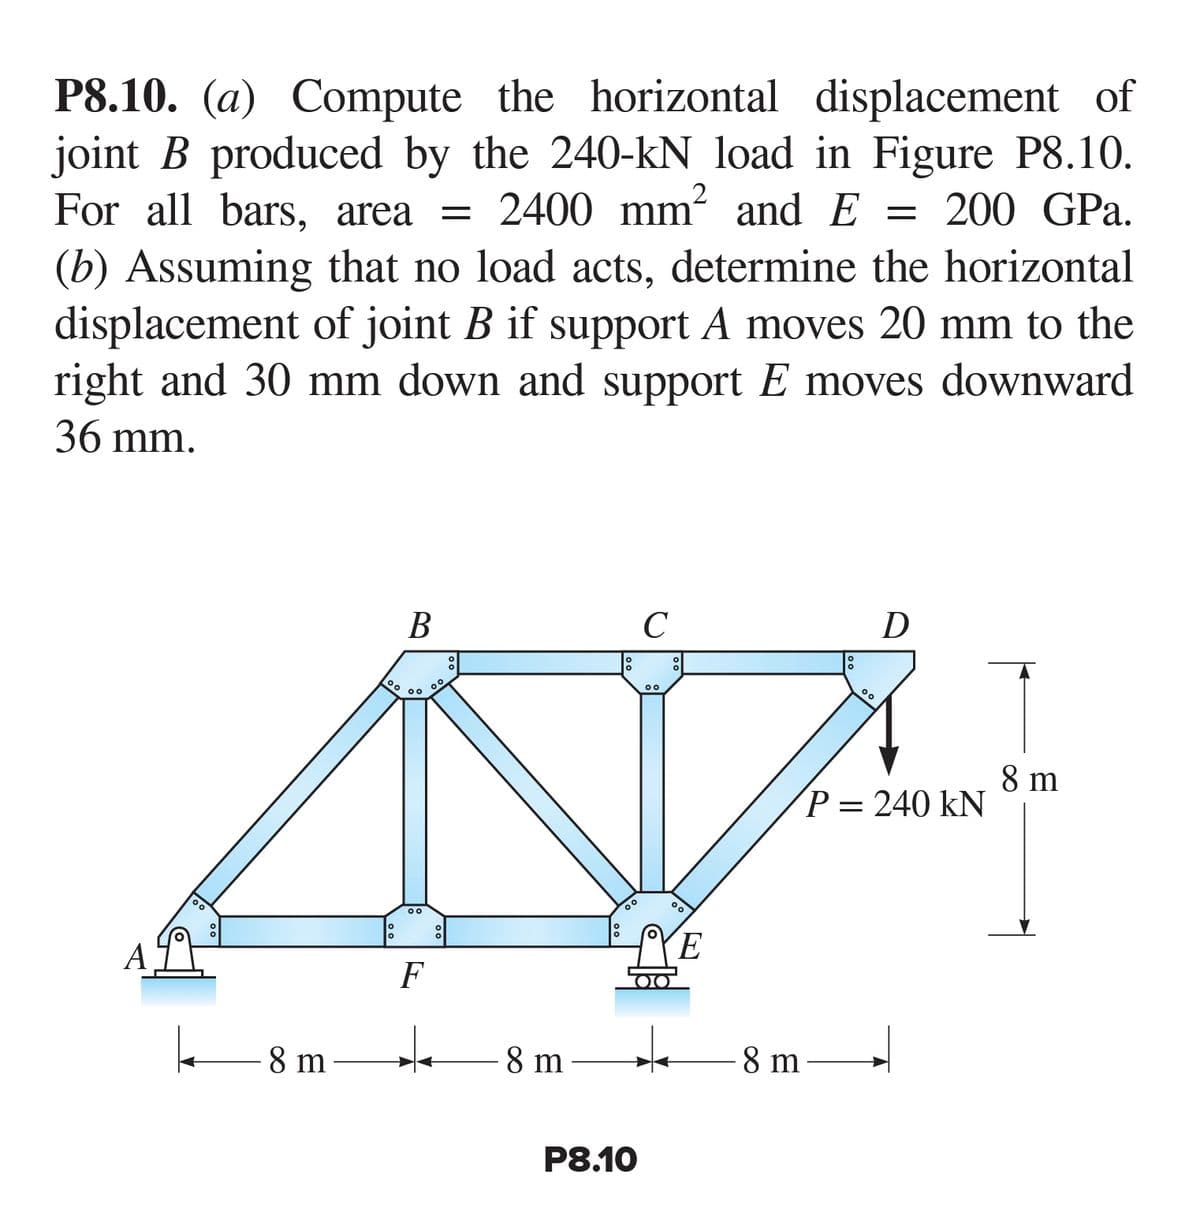 P8.10. (a) Compute the horizontal displacement of
joint B produced by the 240-kN load in Figure P8.10.
For all bars, area = 2400 mm² and E = 200 GPa.
(b) Assuming that no load acts, determine the horizontal
displacement of joint B if support A moves 20 mm to the
right and 30 mm down and support E moves downward
36 mm.
A
00
8 m
00
O
O
B
00
00
F
0°
°
*
18
:
00
C
P8.10
00
ºa
YE
8 m ↓
-8 m
°。
D
P = 240 kN
8 m